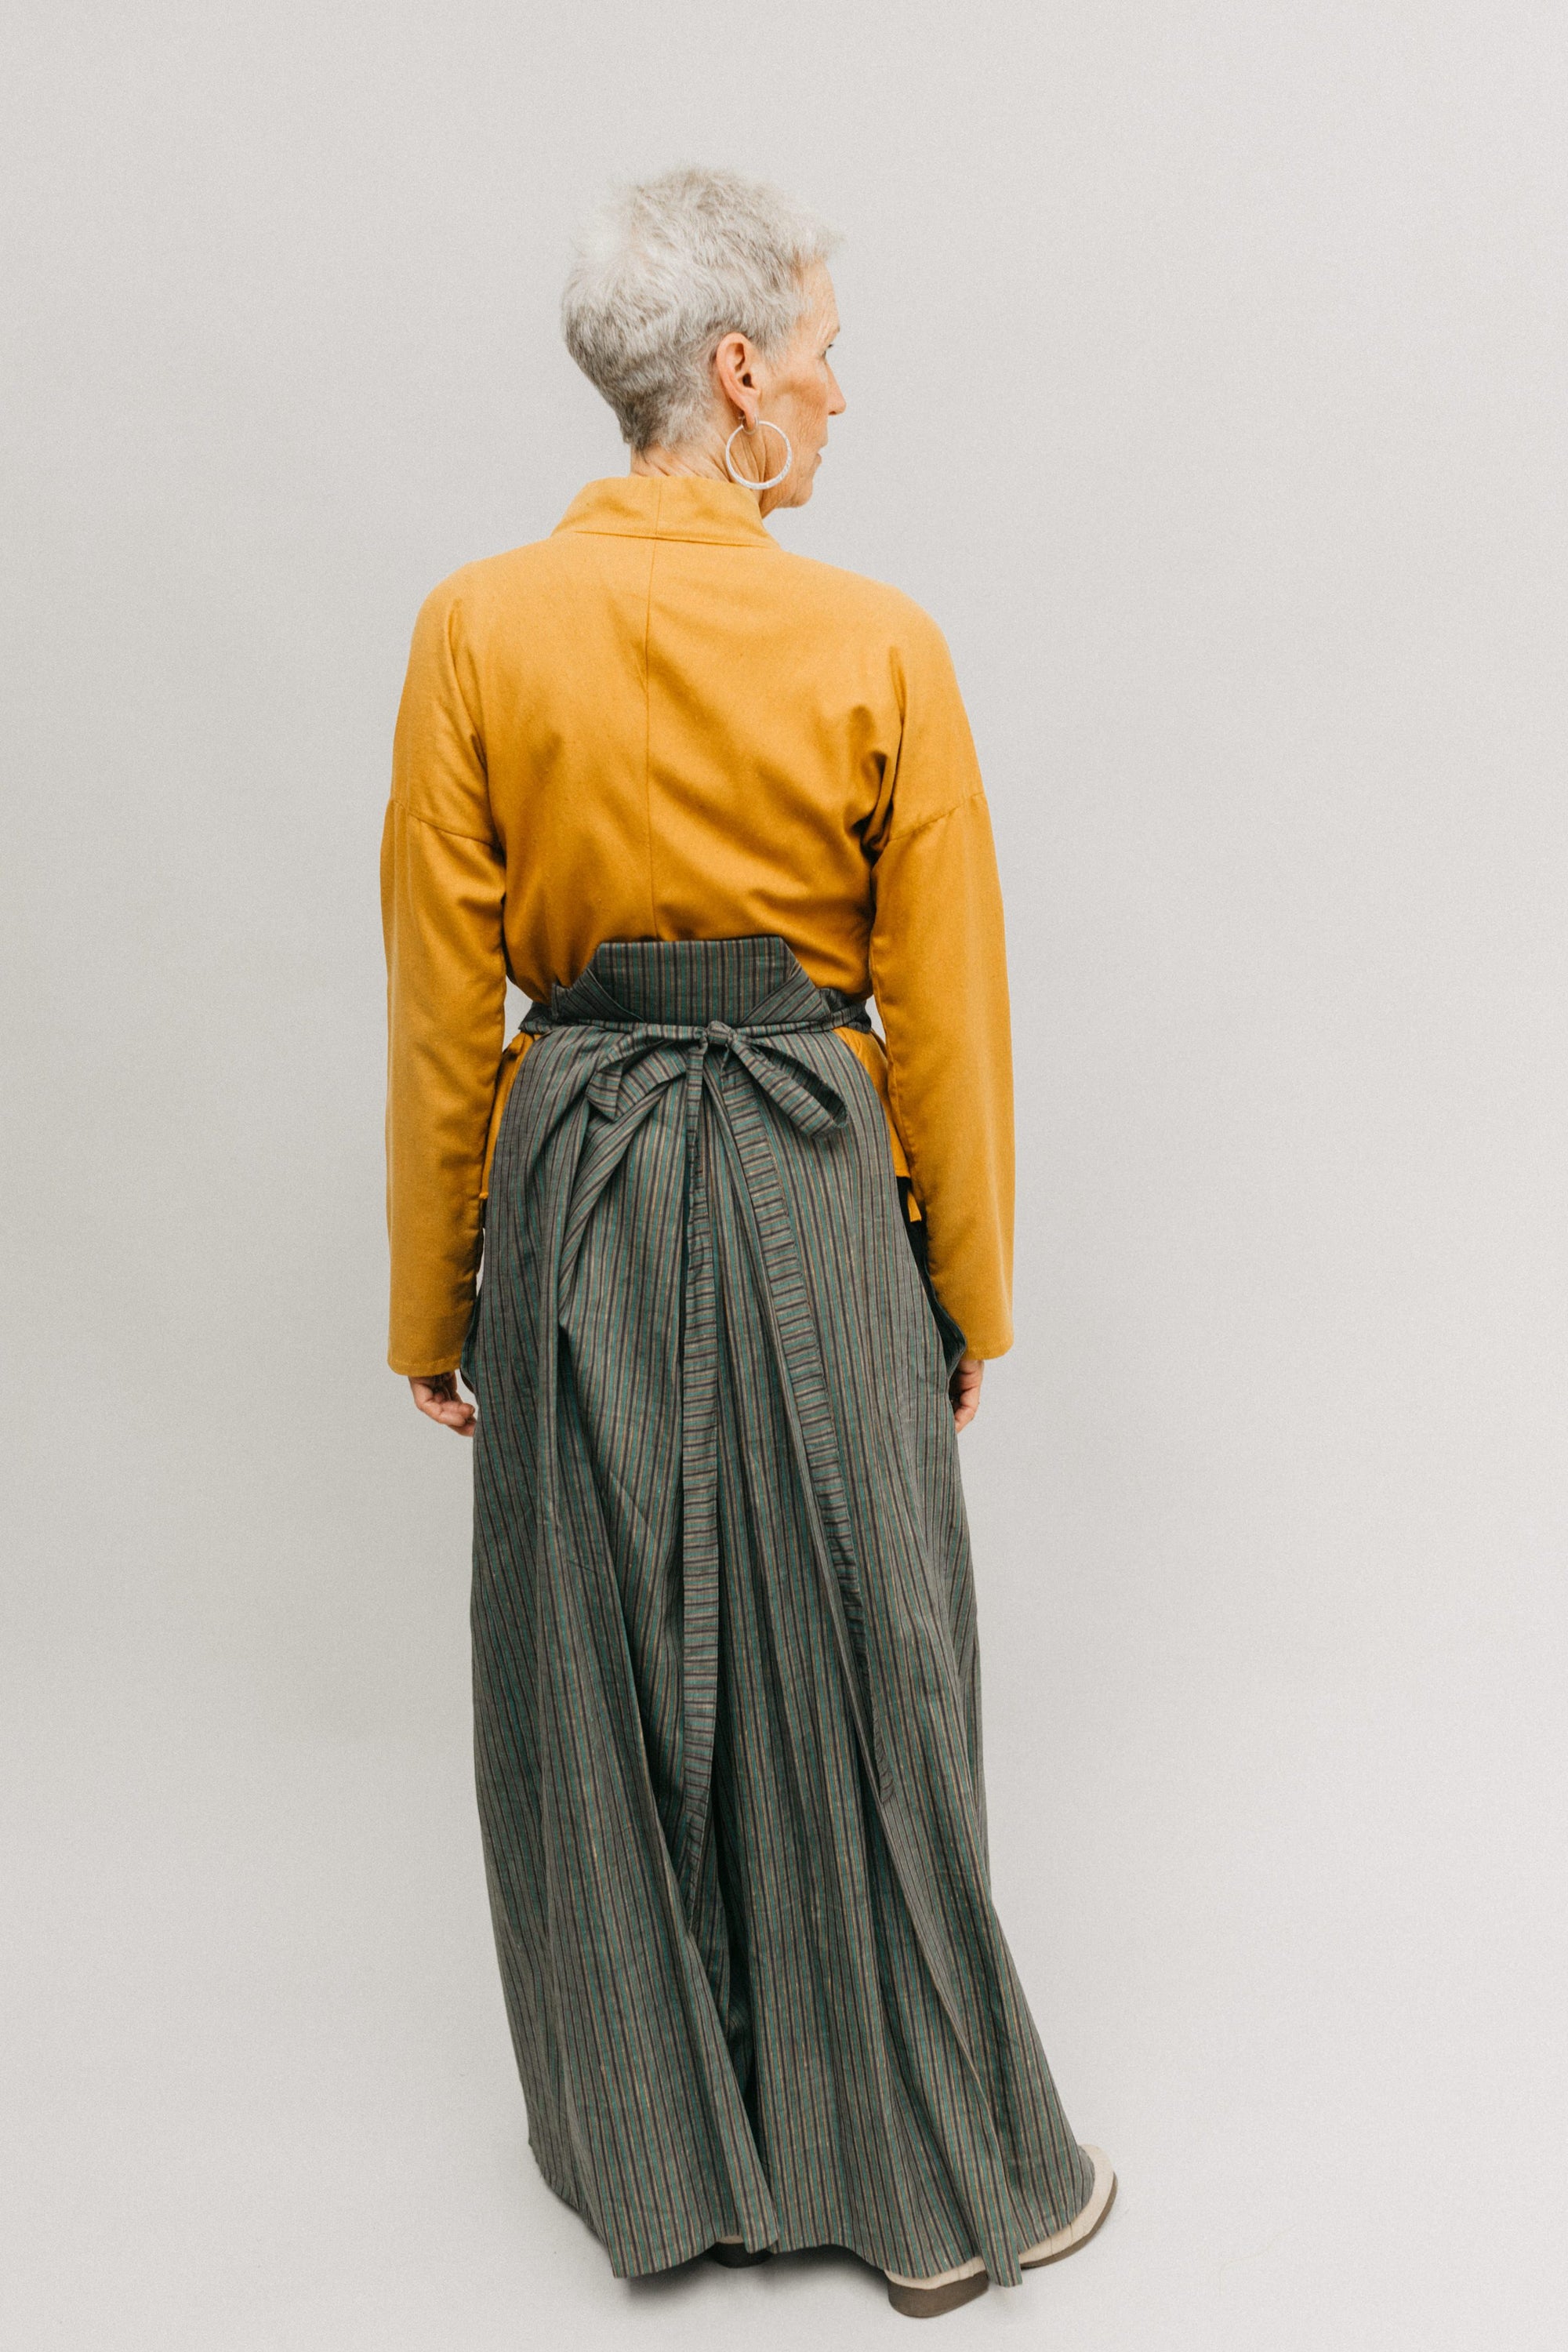 Photo of back view of the Hakama pants on model.